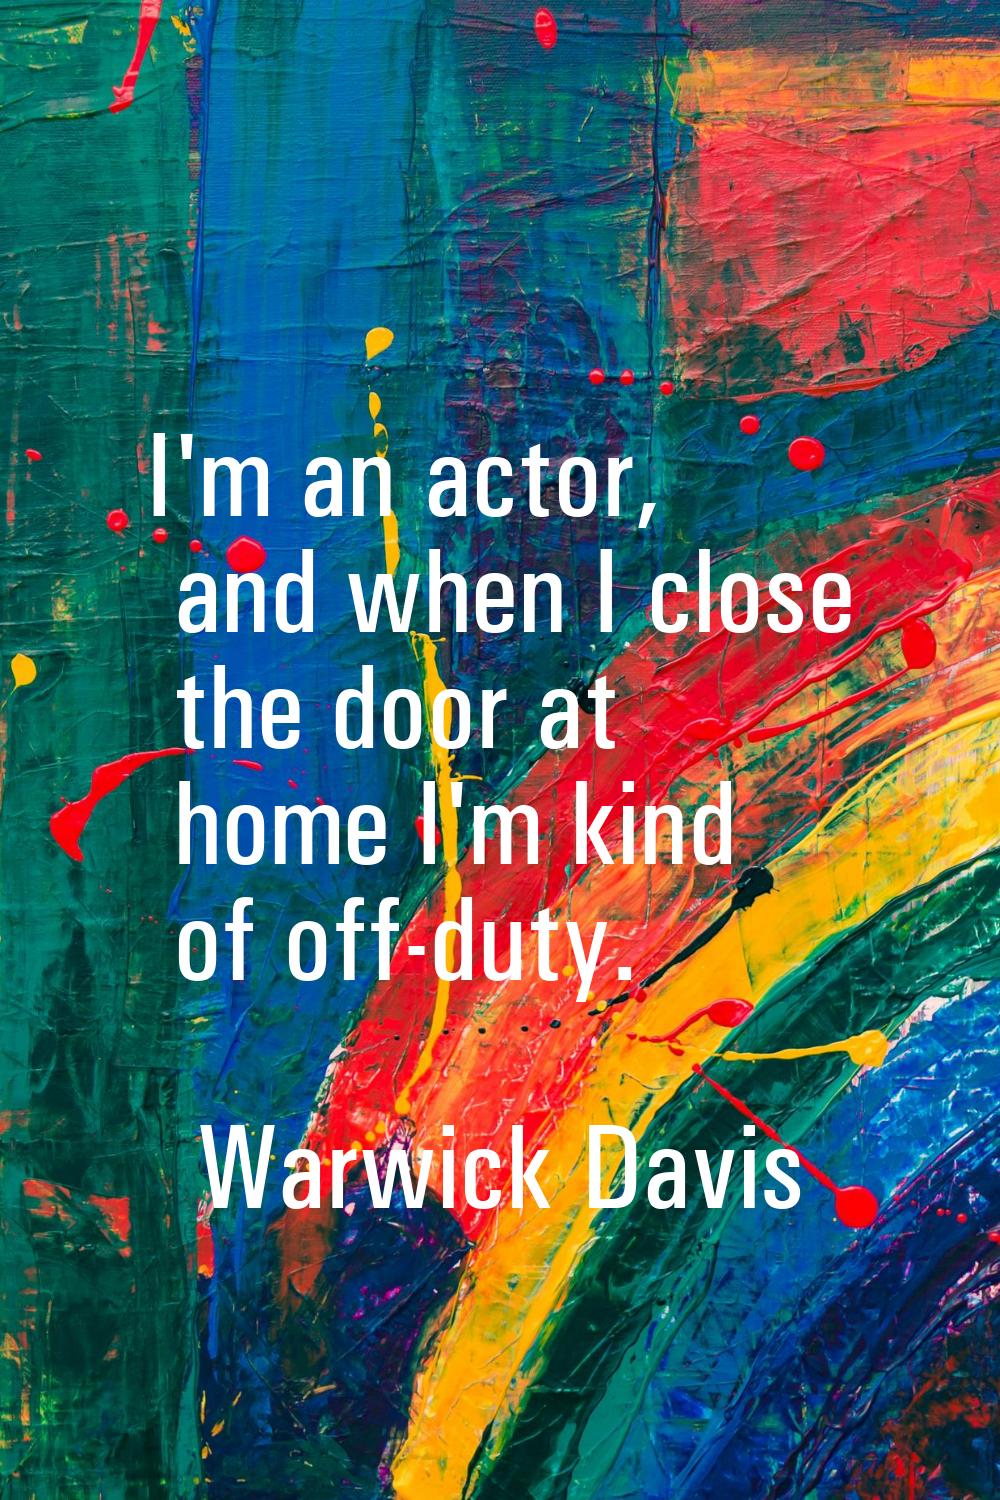 I'm an actor, and when I close the door at home I'm kind of off-duty.